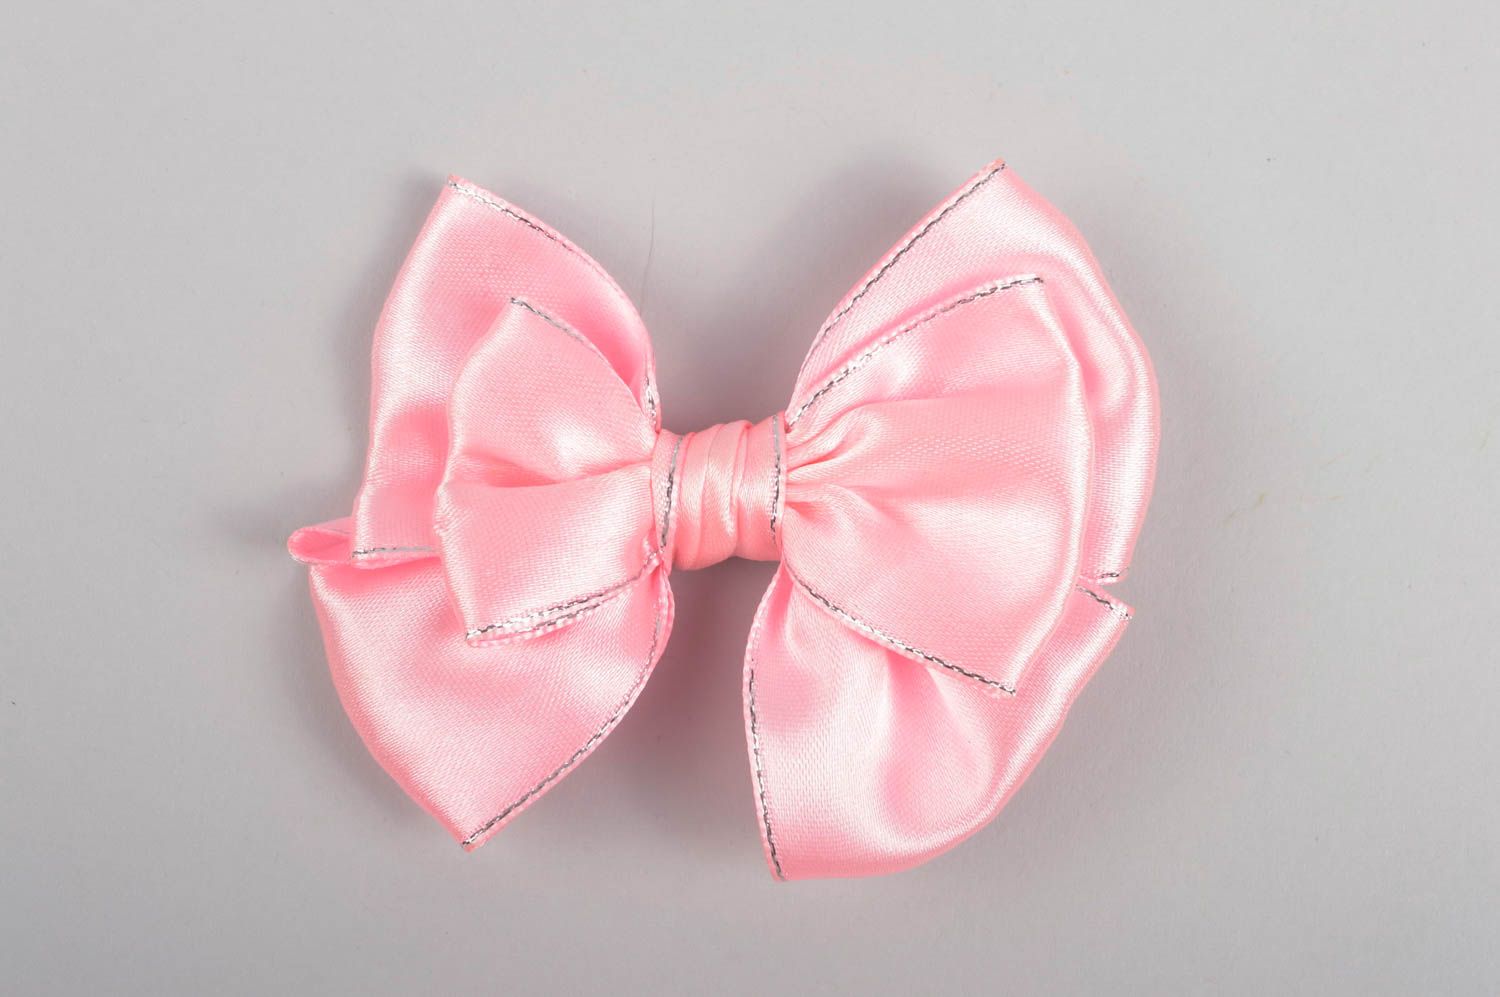 Handmade pink hair accessory hair bow made of ribbons hair bijouterie great gift photo 5